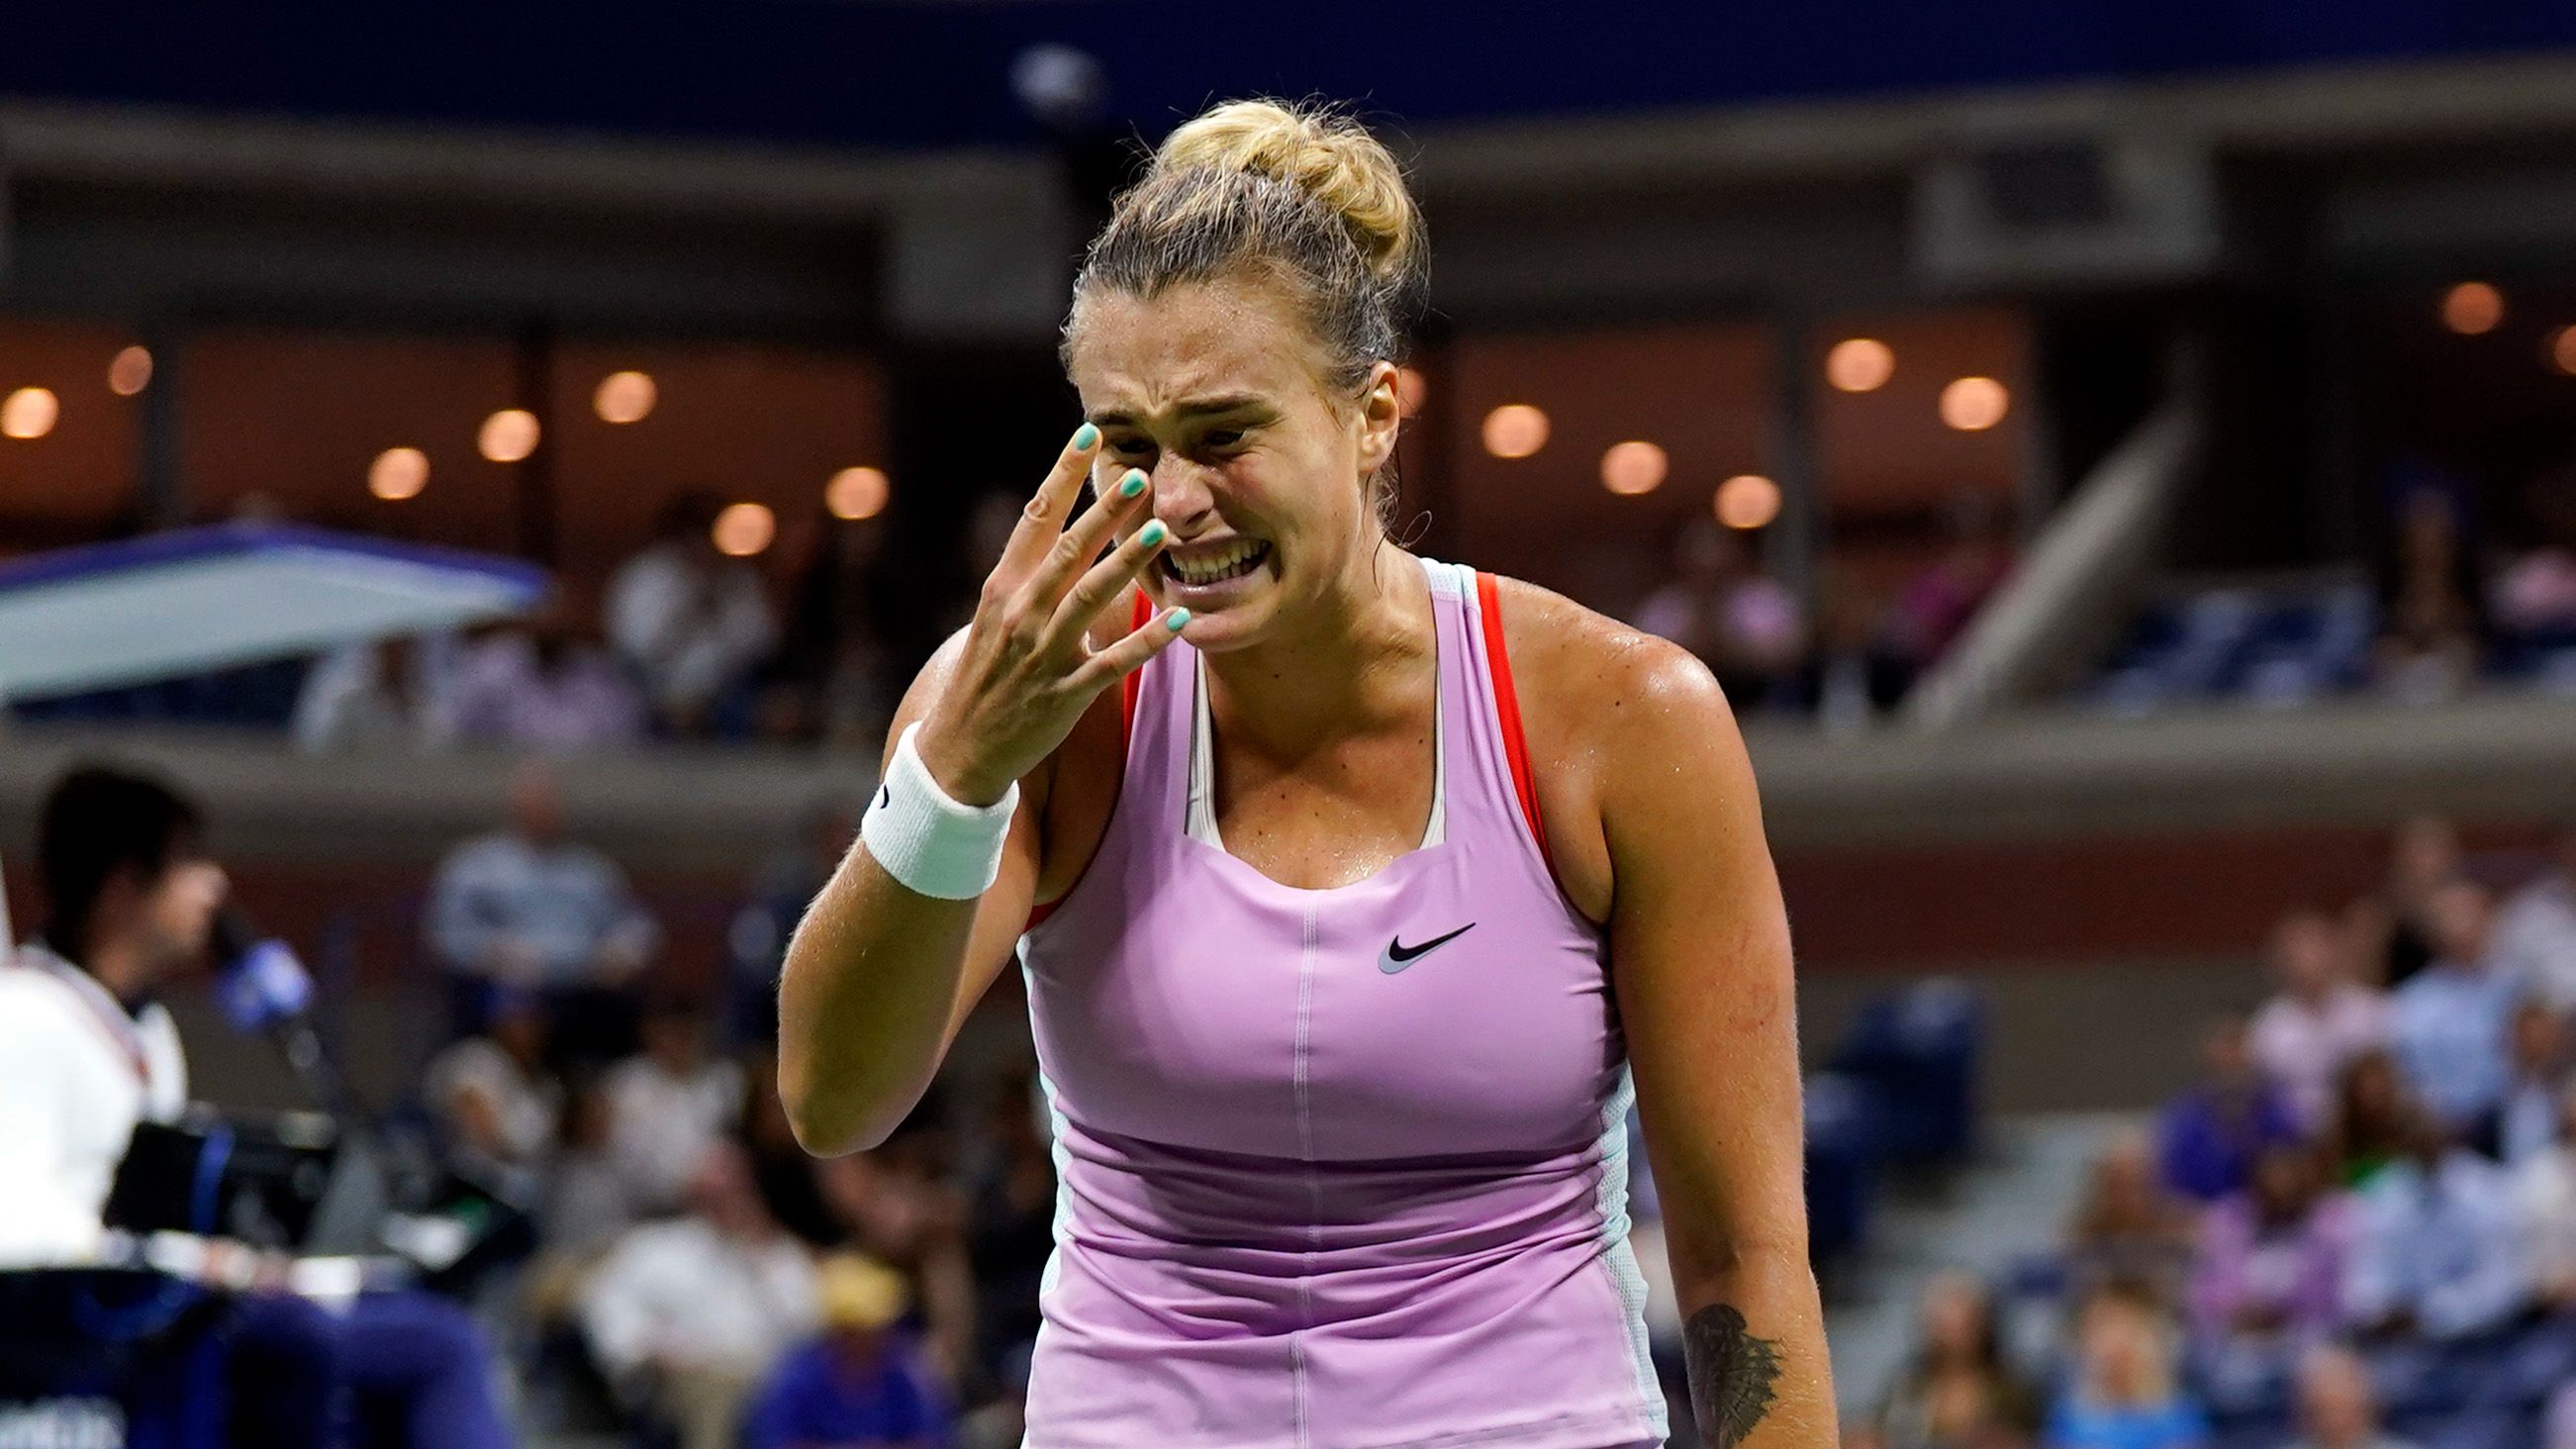 Aryna Sabalenka, of Belarus, reacts to a shot against Iga Swiatek, of Poland, during the semifinals of the U.S. Open tennis championships, Thursday, Sept. 8, 2022, in New York. (AP Photo/John Minchillo)